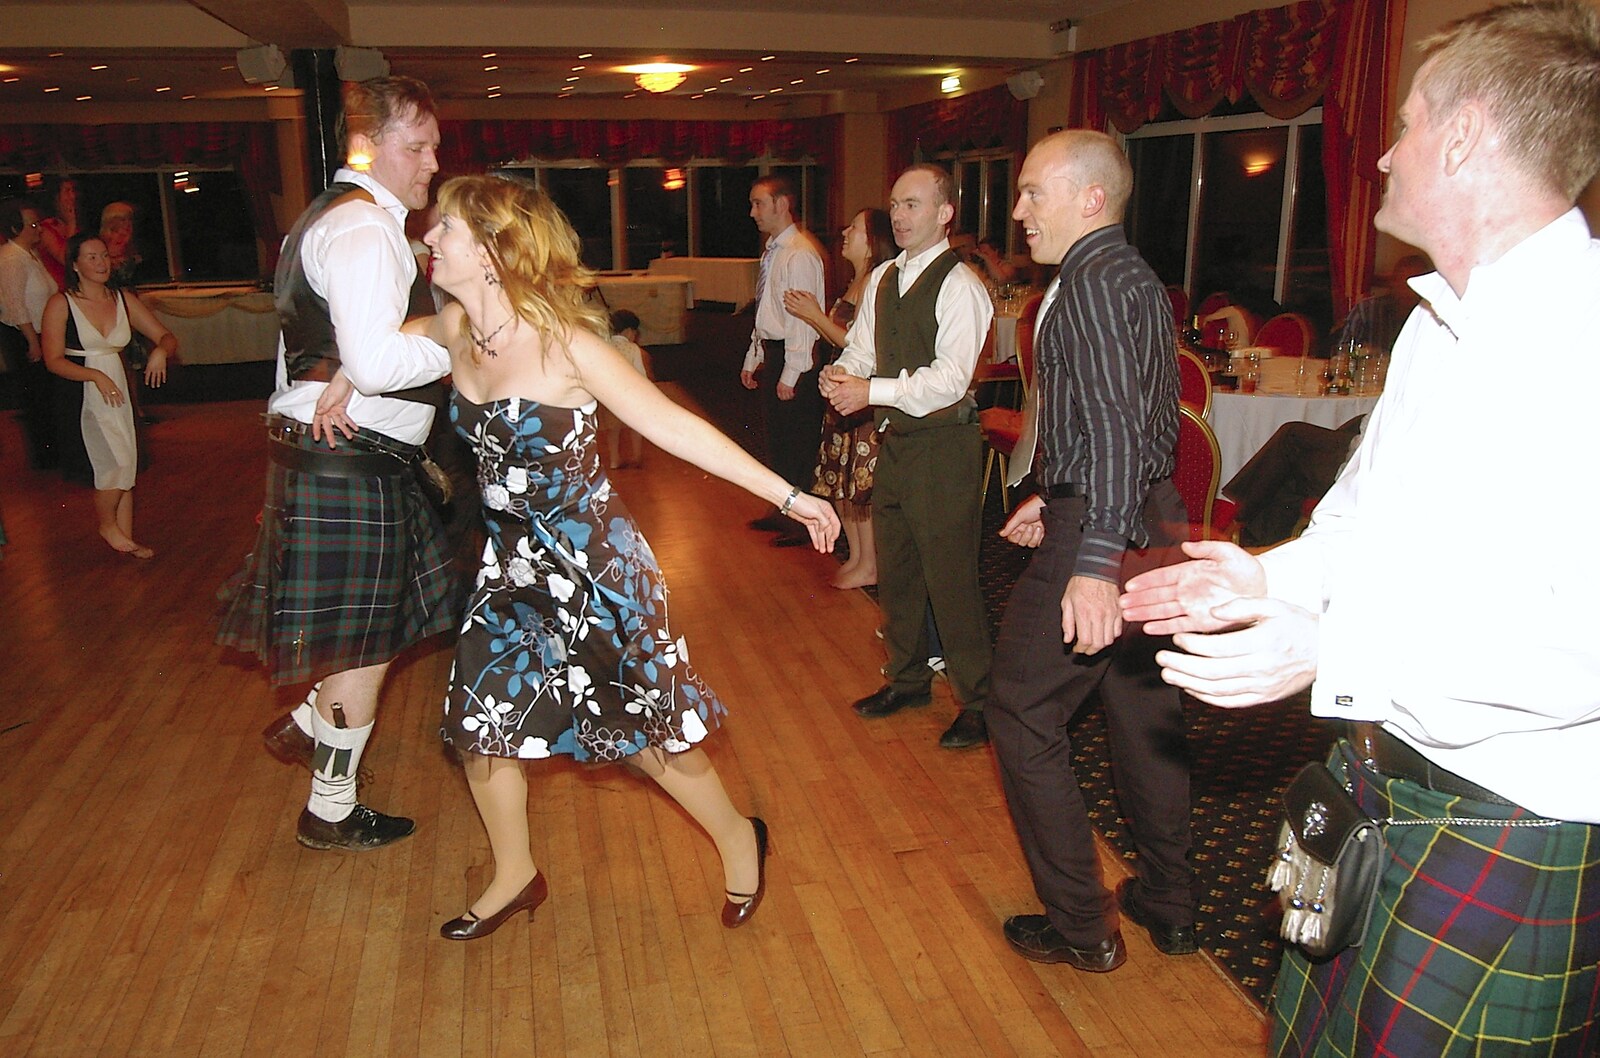 A ceilidh kicks off from Caroline and Chris's Wedding, Spanish Point, County Clare, Ireland - 26th October 2006